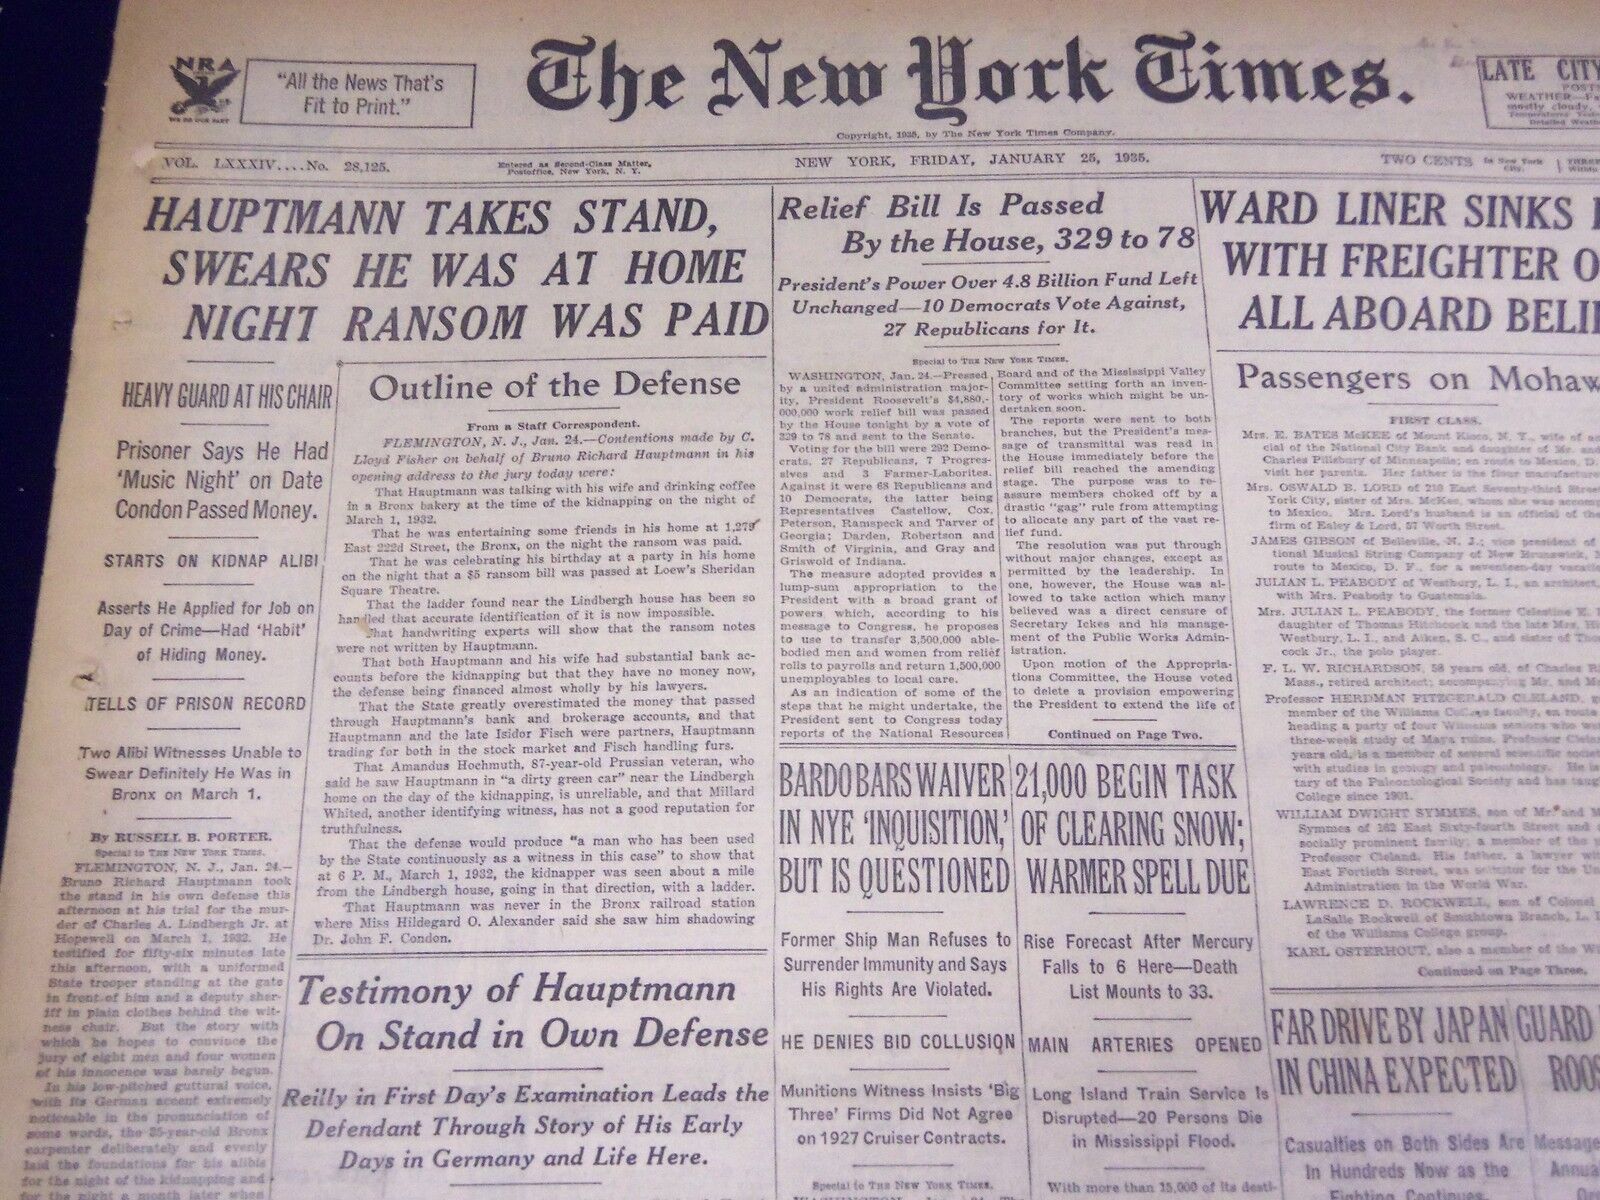 1935 JANUARY 25 NEW YORK TIMES - HAUPTMANN SWEARS HE WAS AT HOME - NT 1951